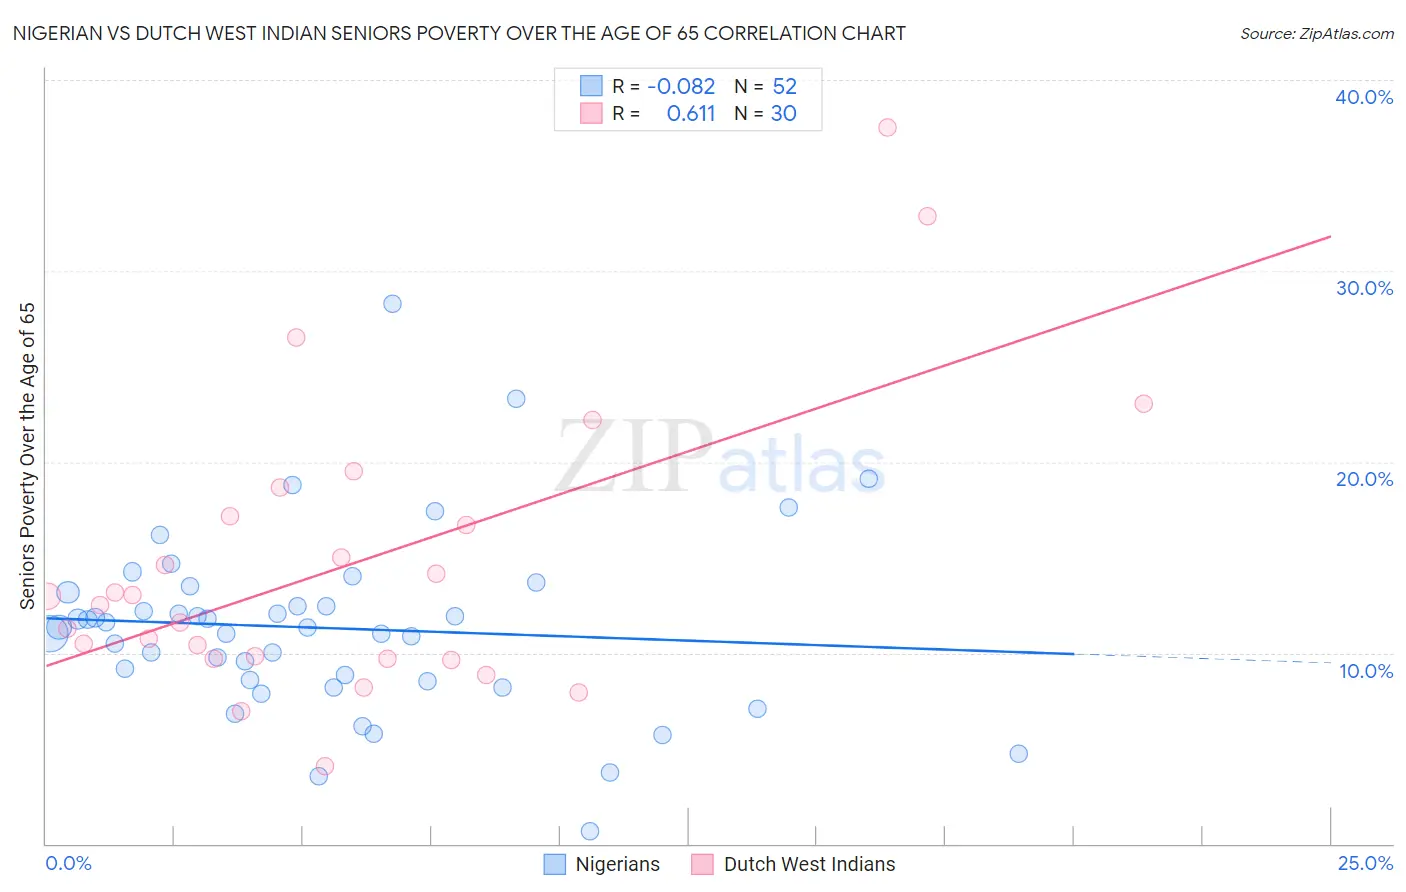 Nigerian vs Dutch West Indian Seniors Poverty Over the Age of 65